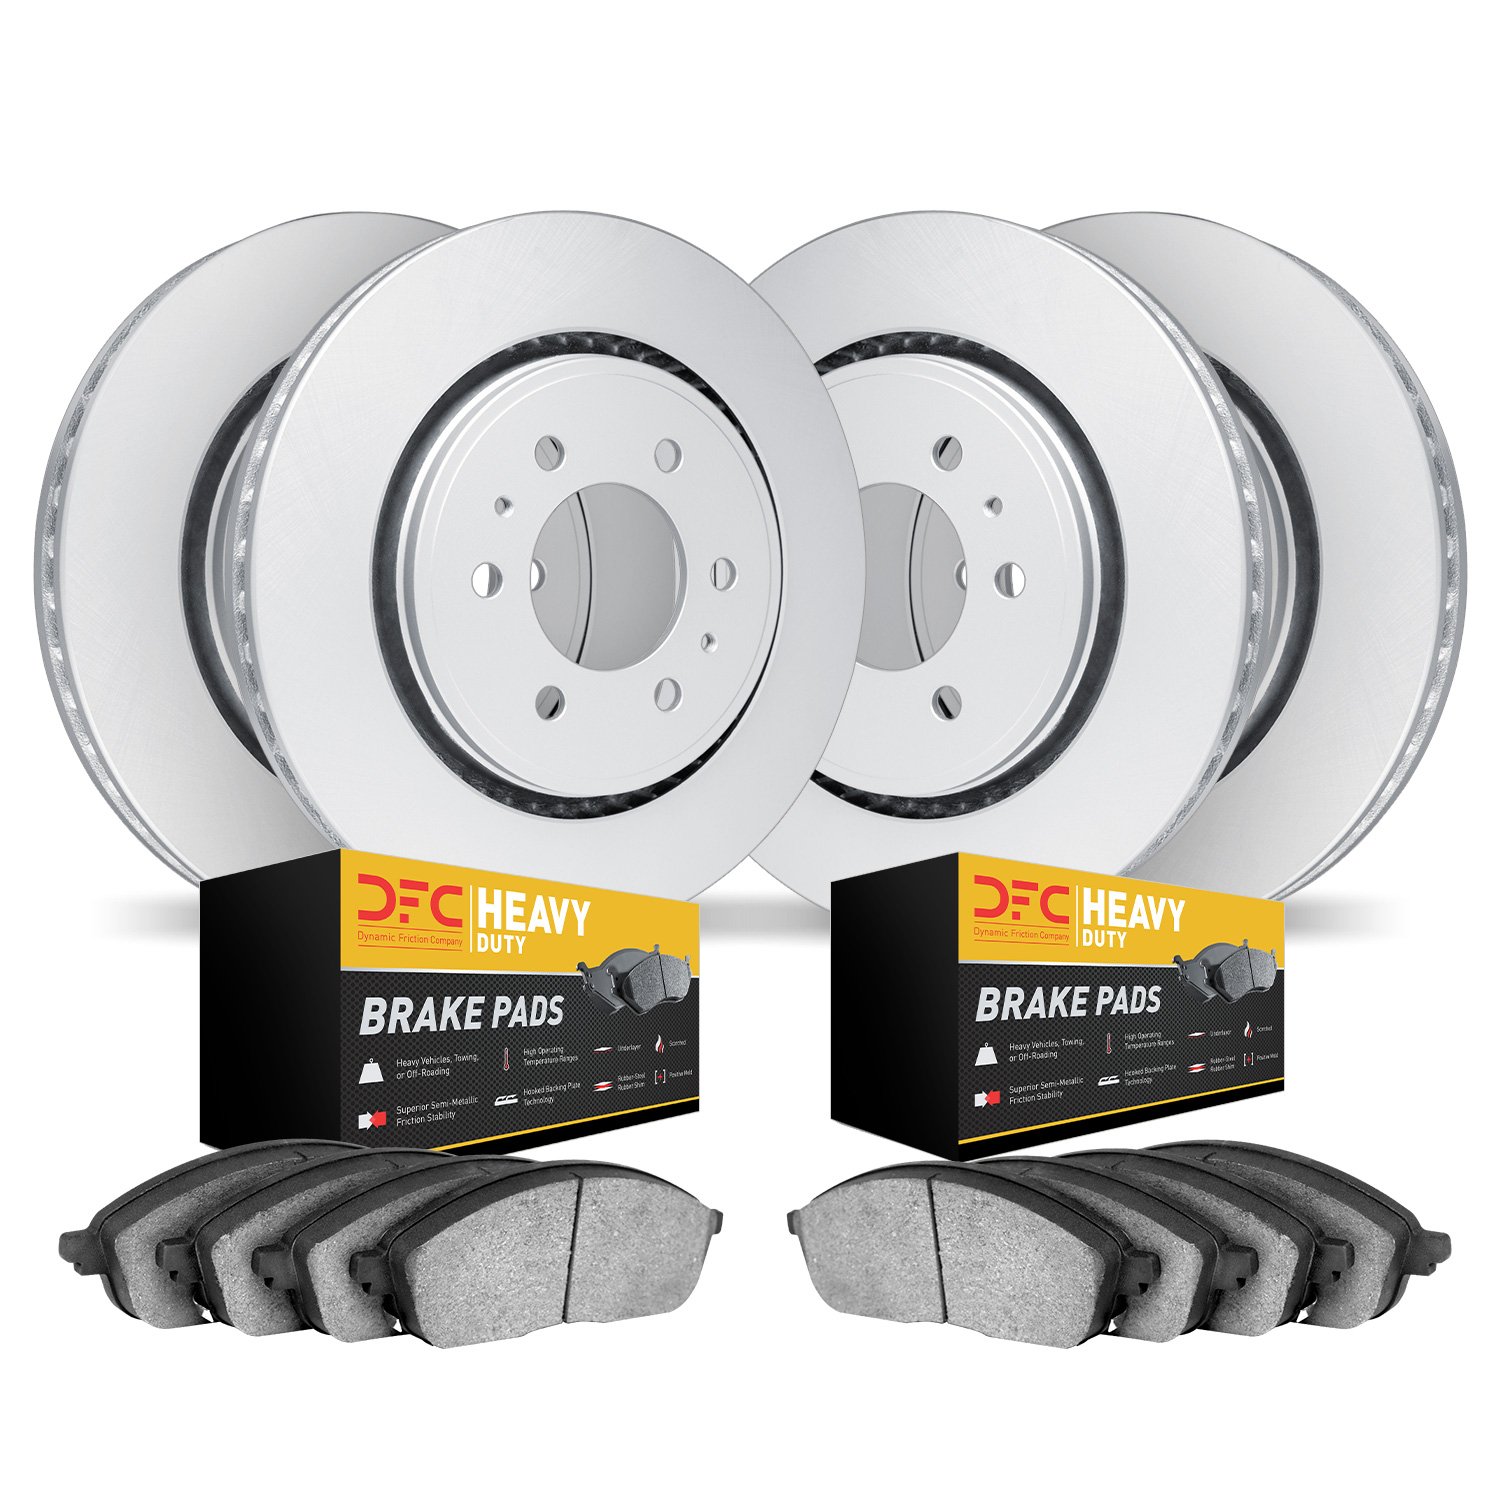 4204-40088 Geospec Brake Rotors w/Heavy-Duty Brake Pads Kit, Fits Select Multiple Makes/Models, Position: Front and Rear